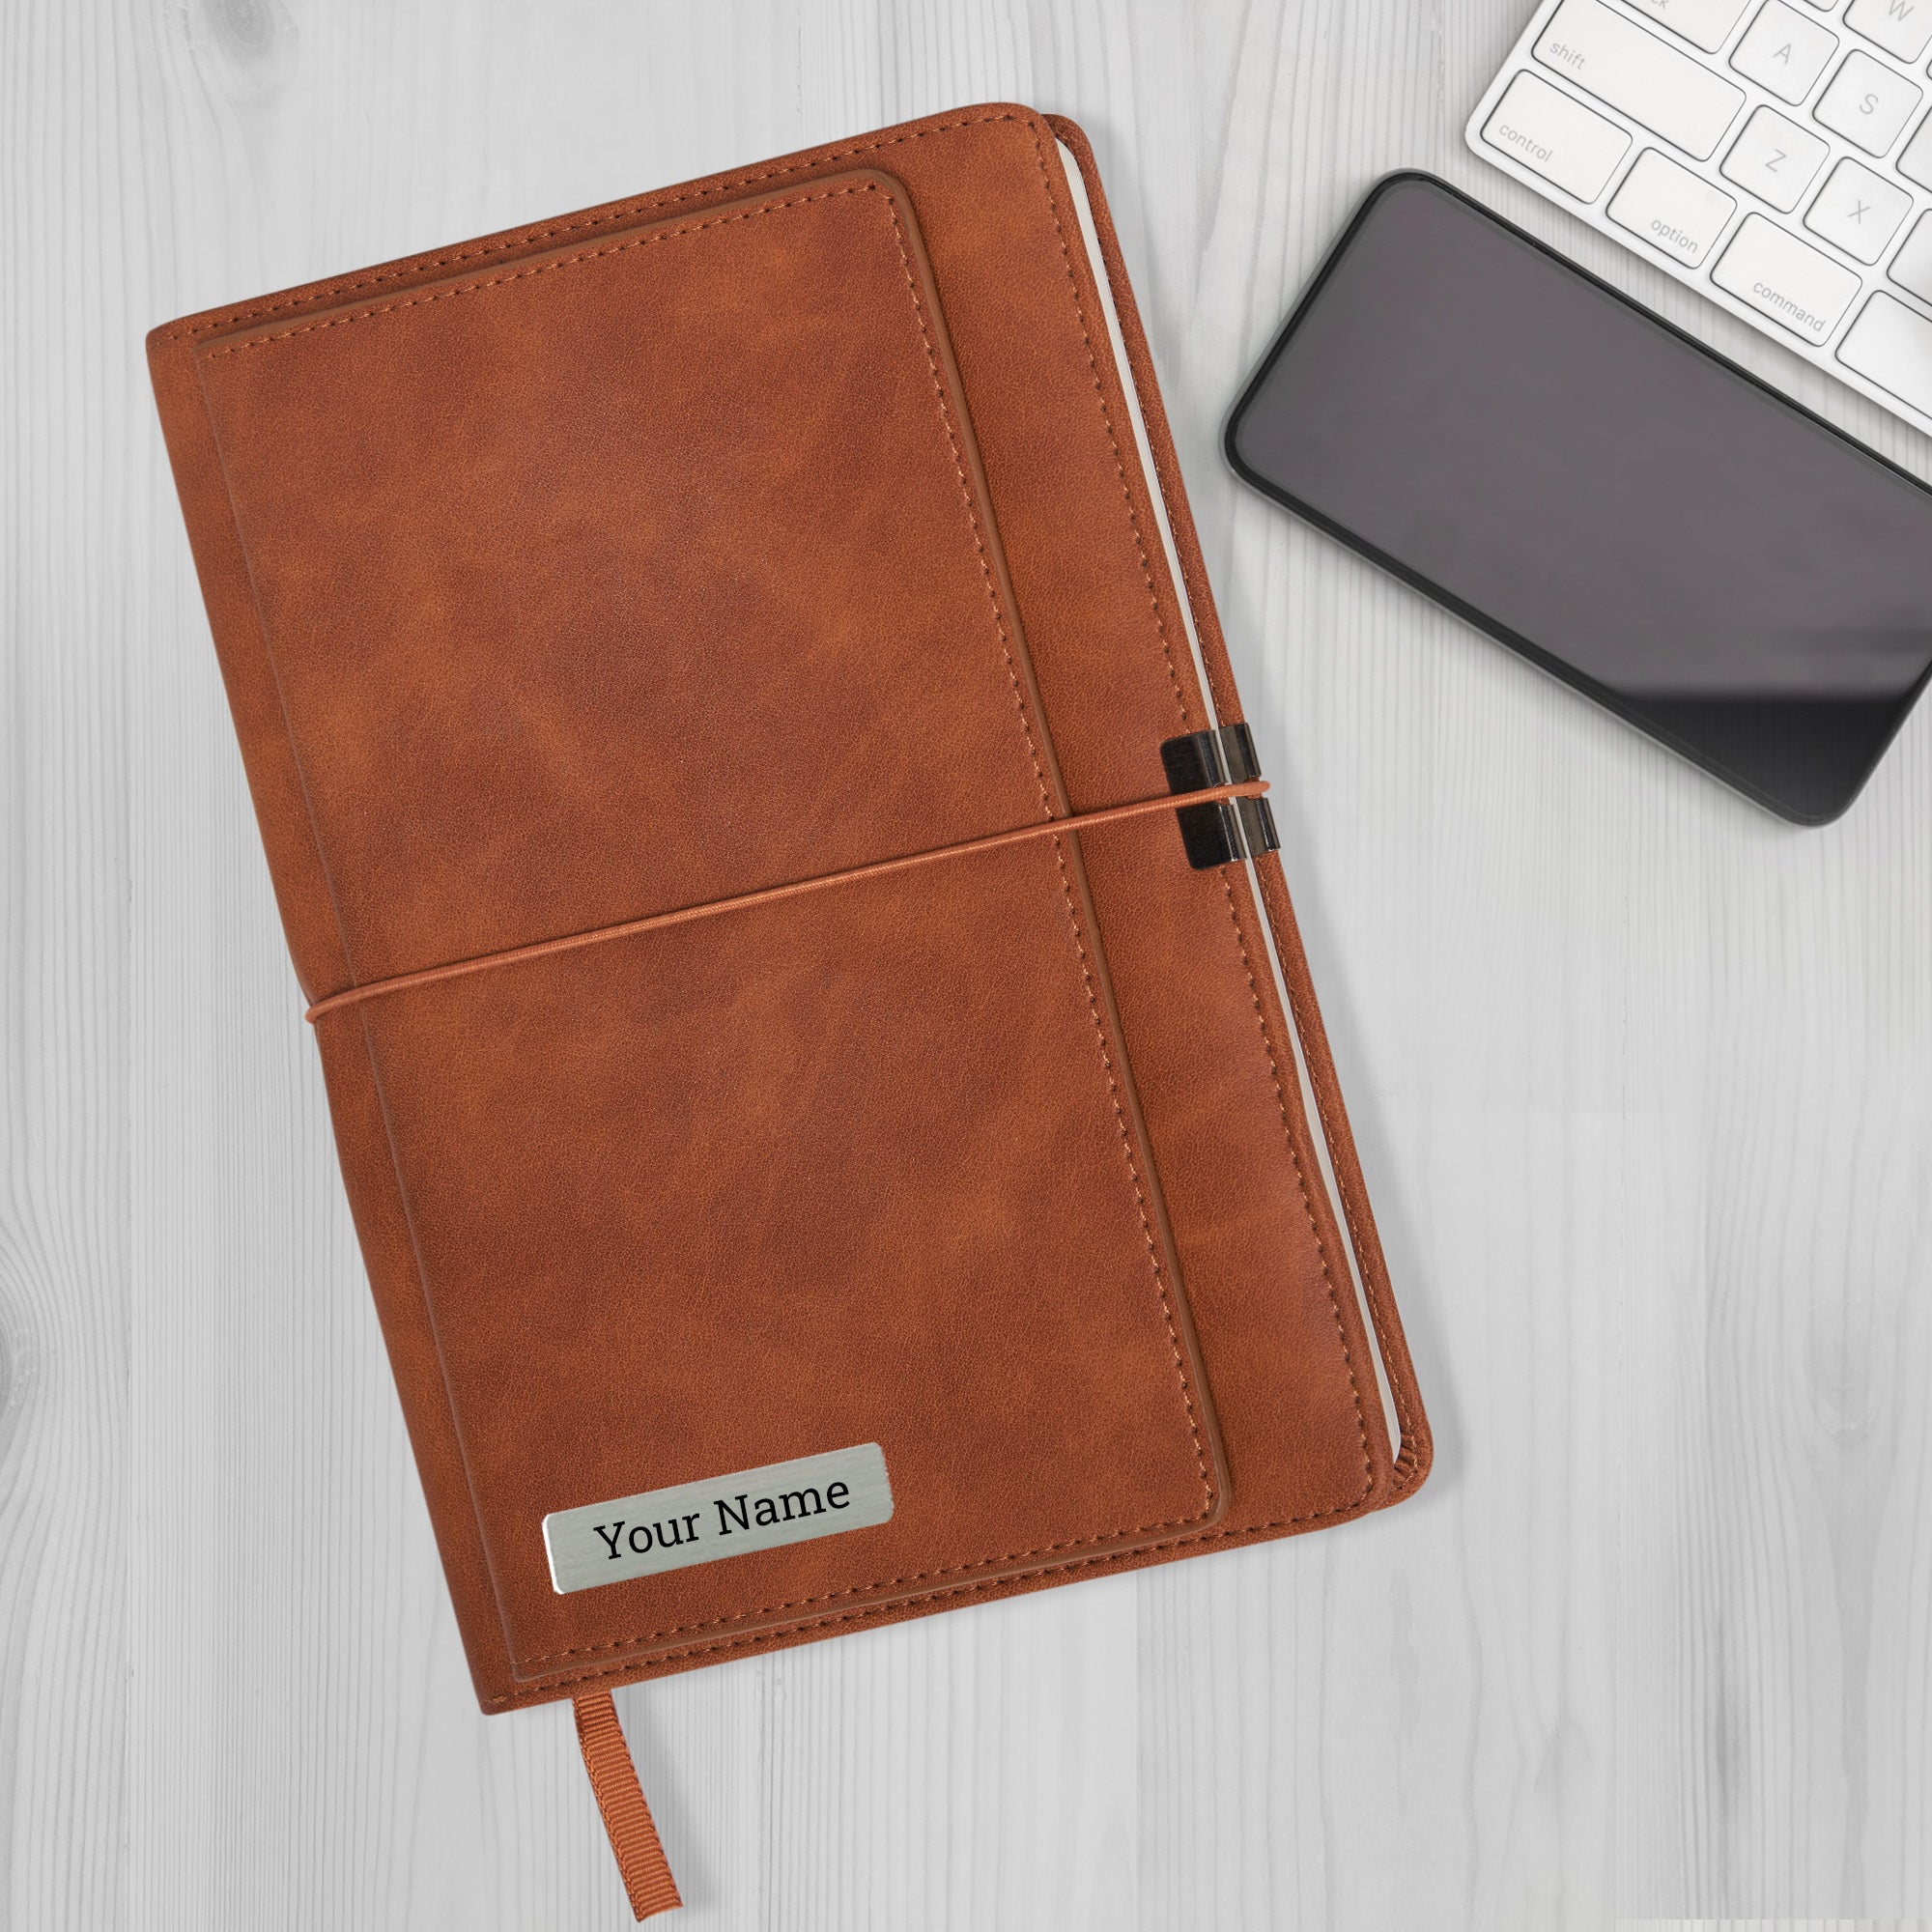 Doodle Connect Personalized Cambie - A5 Hard Bound Sophisticated Faux Leather Executive Notebook Diary - Brown